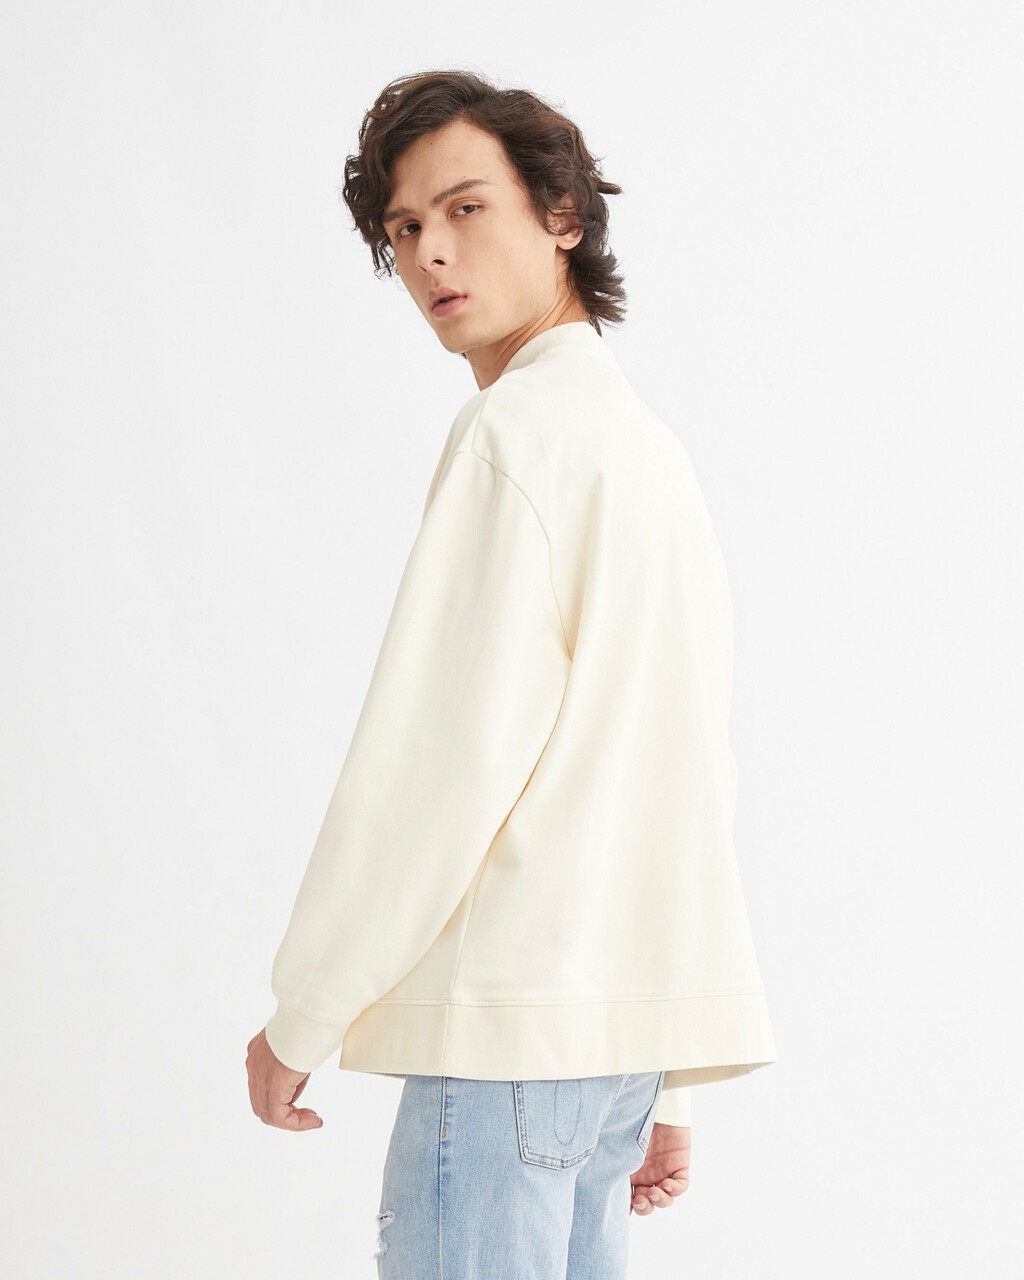 UNISEX RELAXED COTTON TERRY SWEATSHIRT, Ivory, hi-res